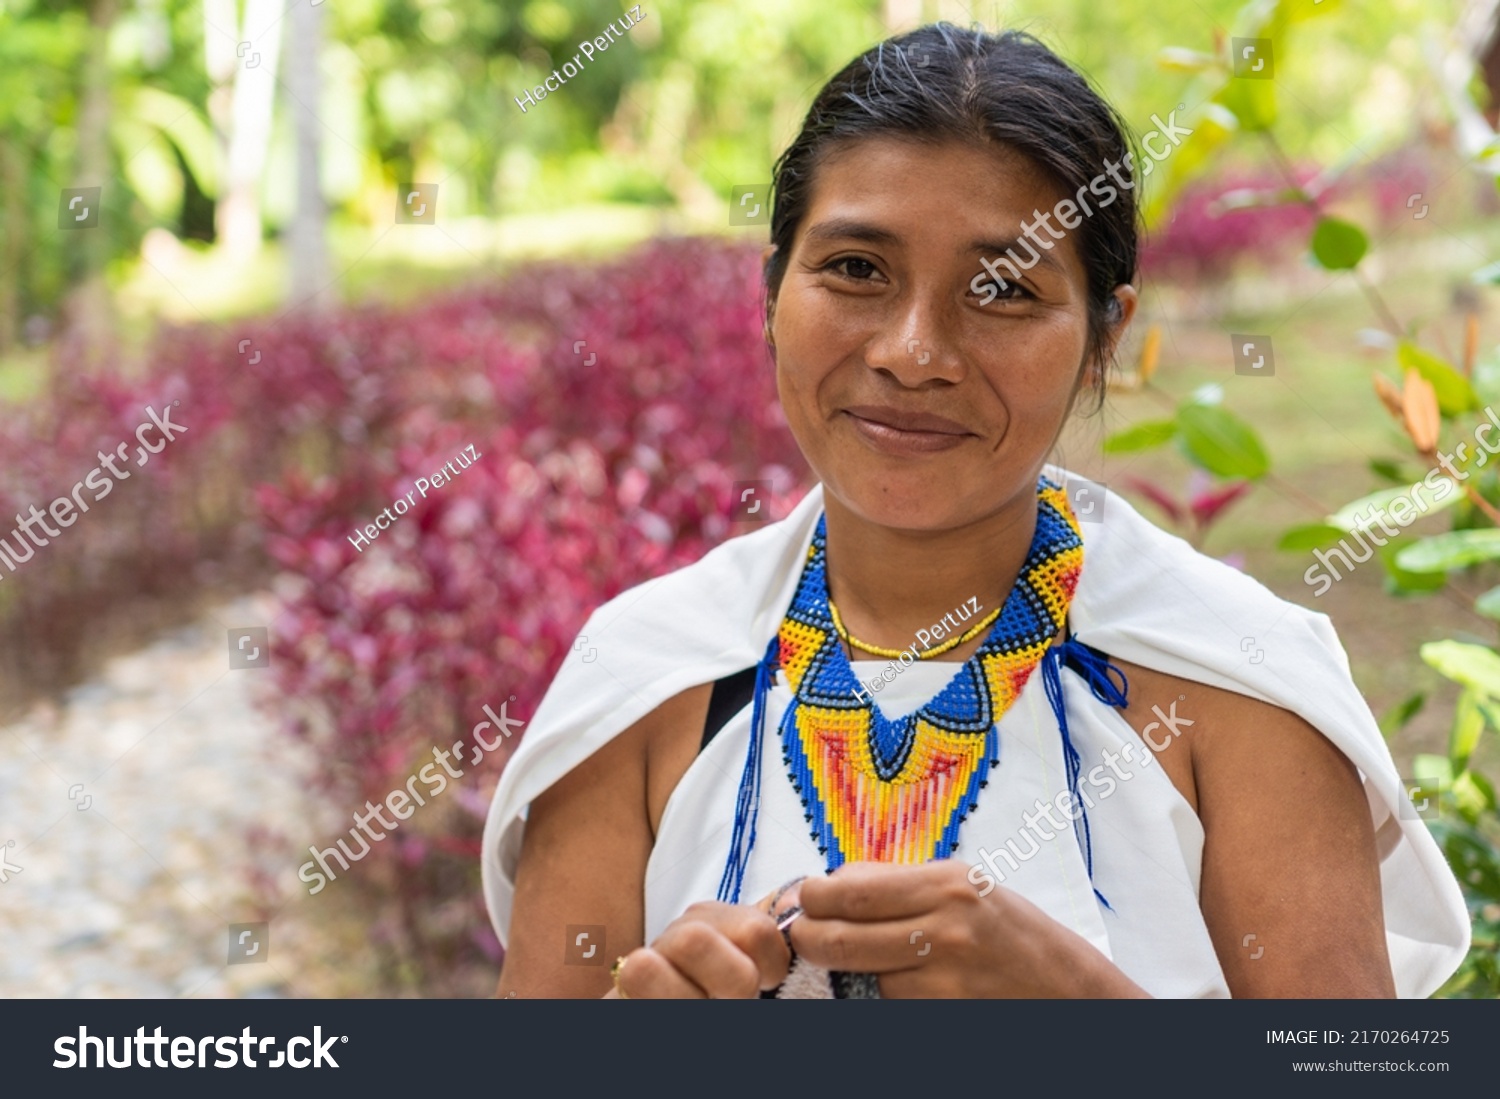 Stock photo of a portrait of a Colombian woman in traditional clothing. Beautiful shot of a young indigenous woman from the Sierra Nevada de Santa Marta, smiling looking at the camera. #2170264725